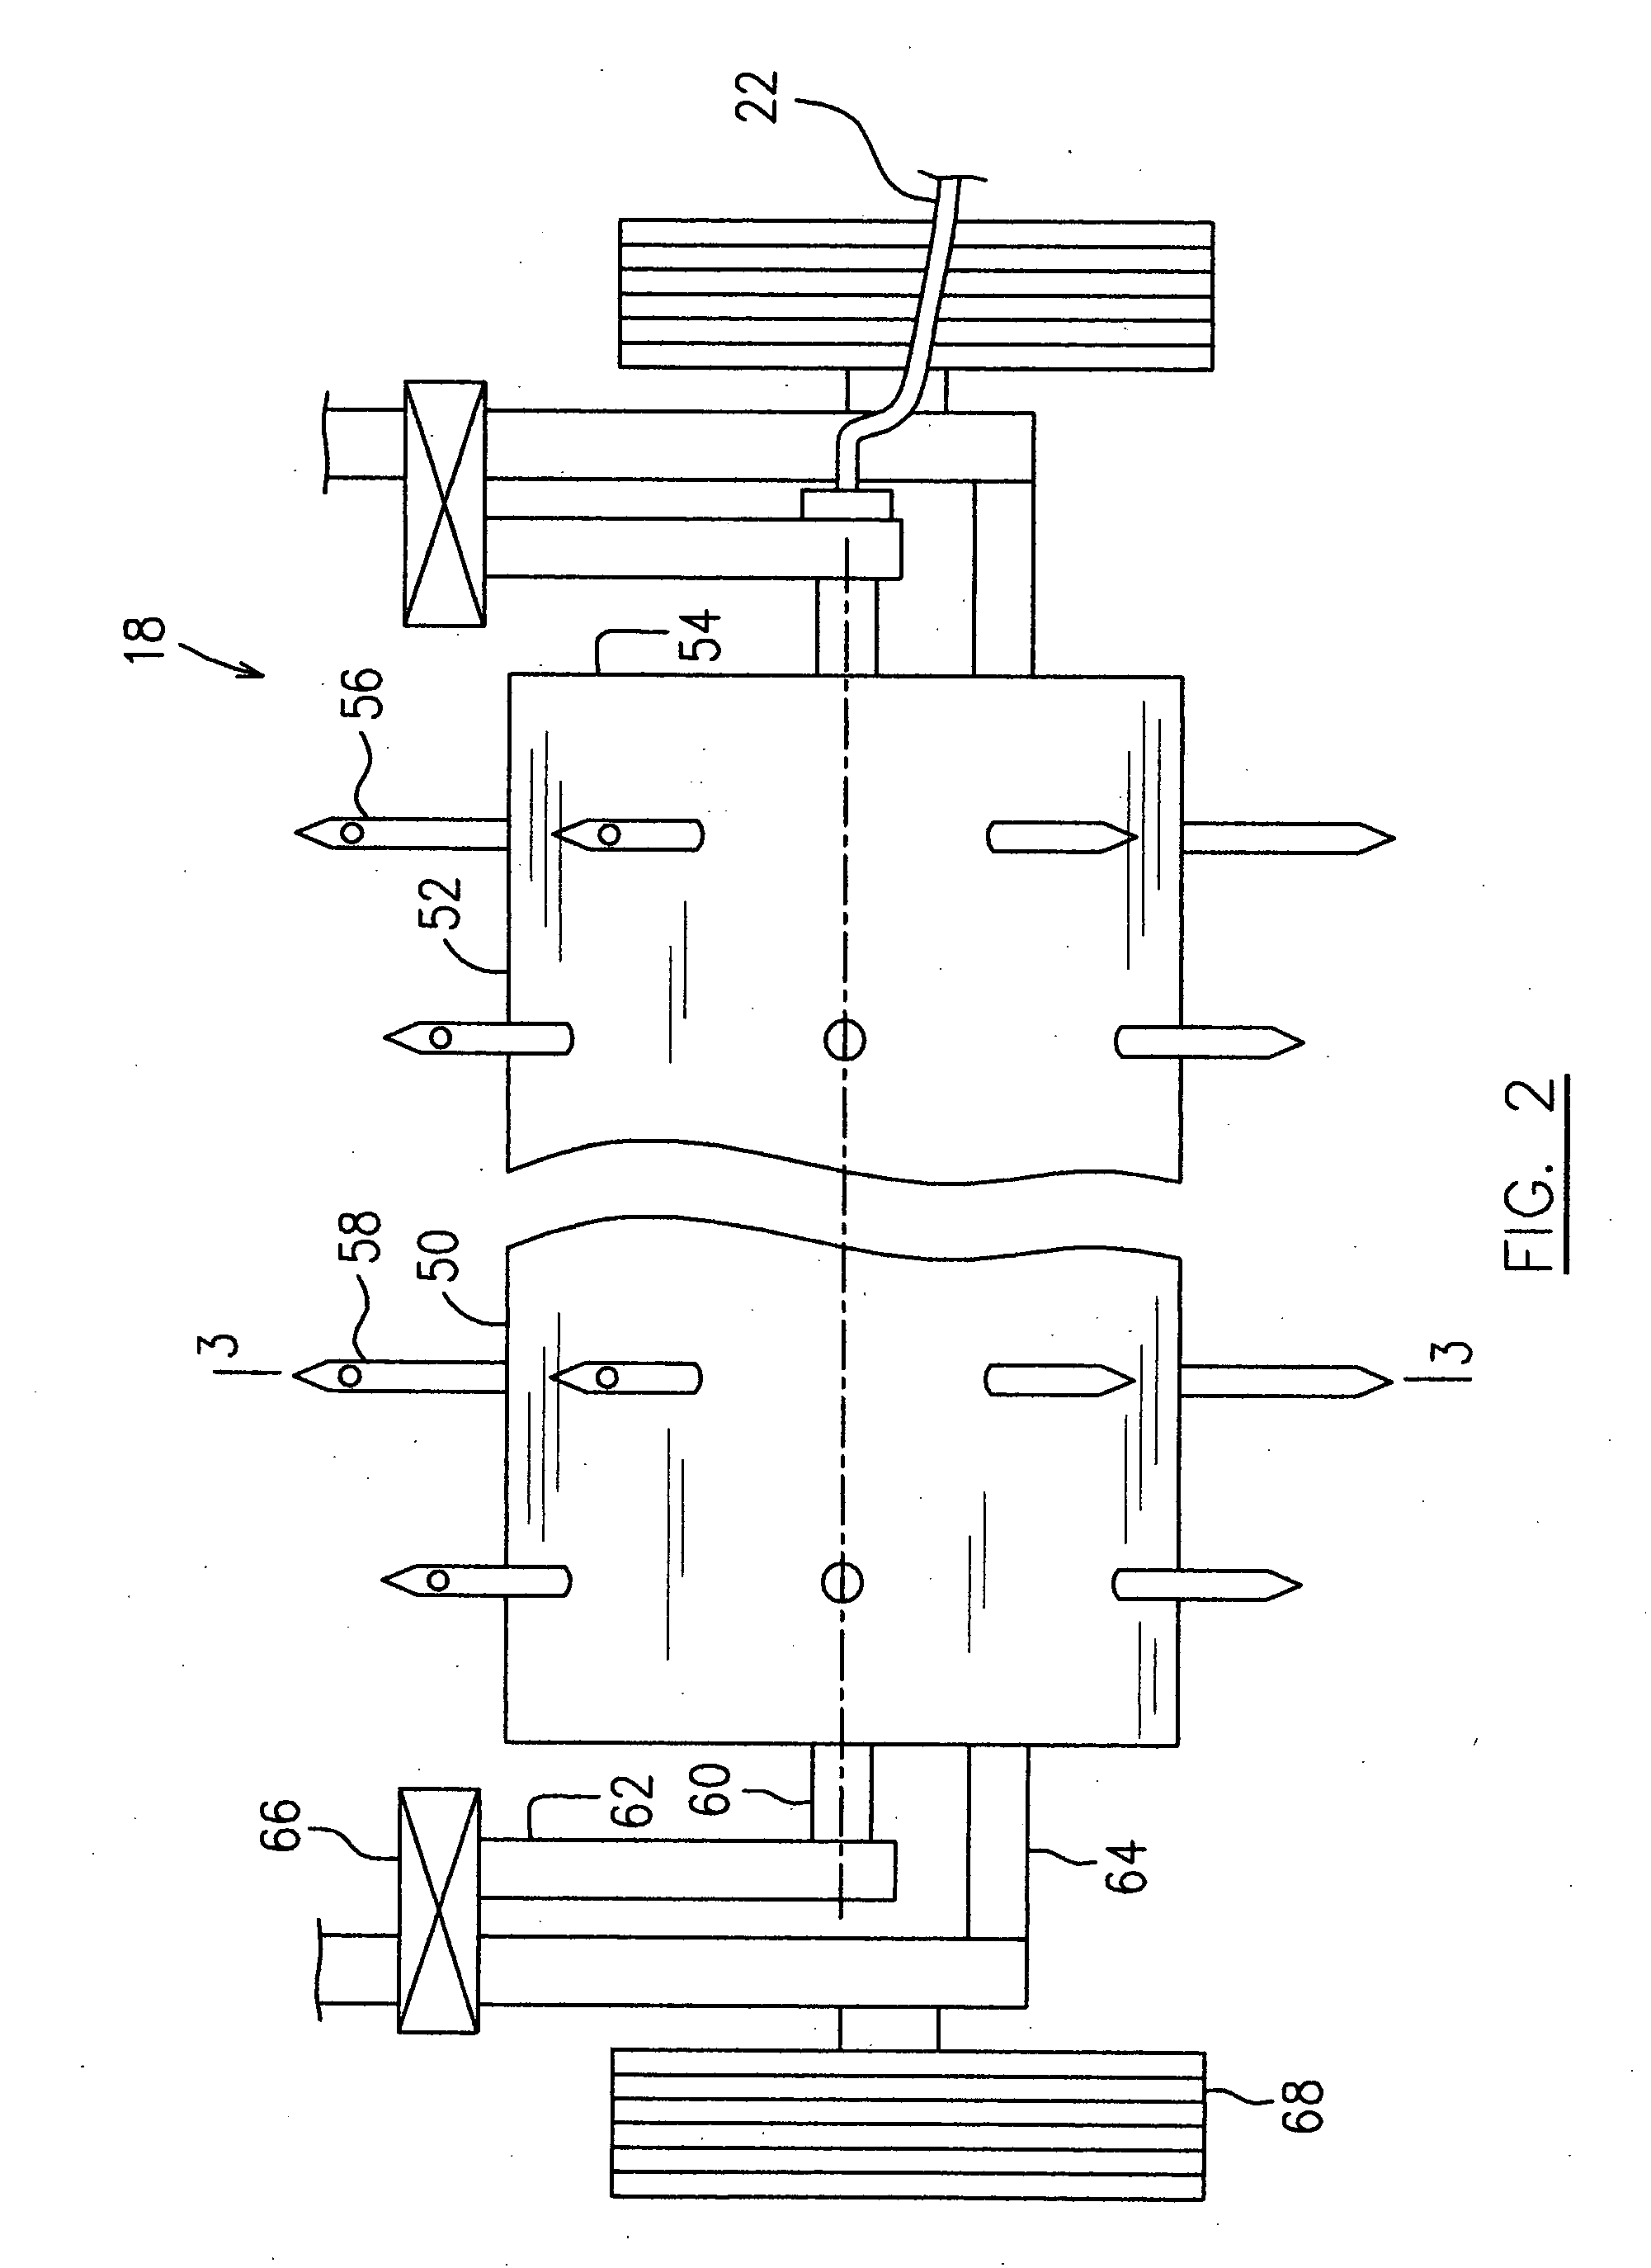 Apparatus and method for treating synthetic grass turf